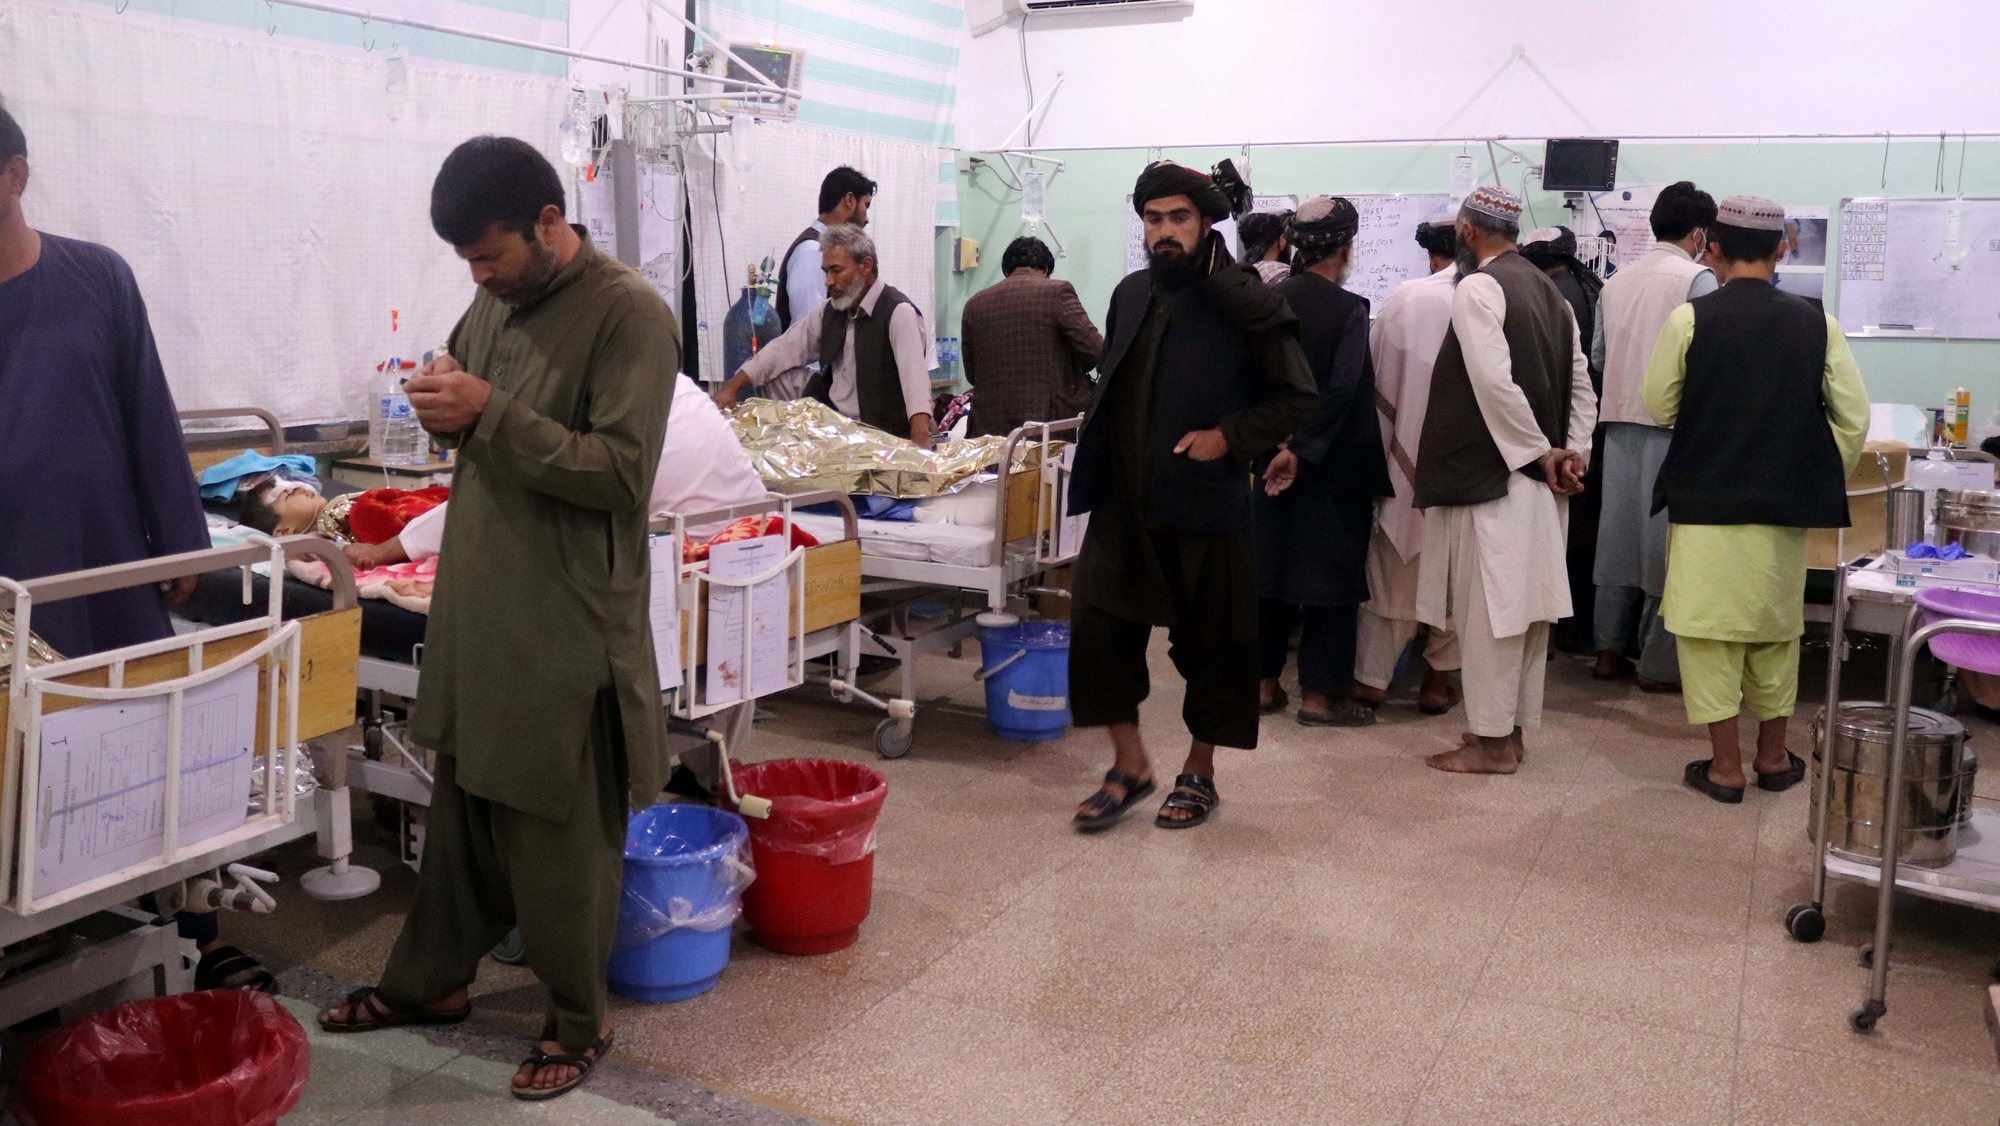 epa09526075 Injured victims of the bomb blast during Friday congregational prayers at Shi&#039;ite Muslims Mosque, receive treatment at a hospital in Kandahar, Afghanistan, 15 October 2021. At least 32 worshipers died, and many others suffered injuries in a powerful explosion that ripped through a Shi&#039;ite mosque in the southern Afghan city of Kandahar during Friday prayers, officials said. The Islamic State has carried out numerous attacks, in recent years, against the Shia minority, especially the Hazaras. The Taliban have launched massive operations against the Islamic State in different Afghan provinces, aiming to finish a group that they consider the main threat to their government.  EPA/STRINGER ATTENTION: GRAPHIC CONTENT